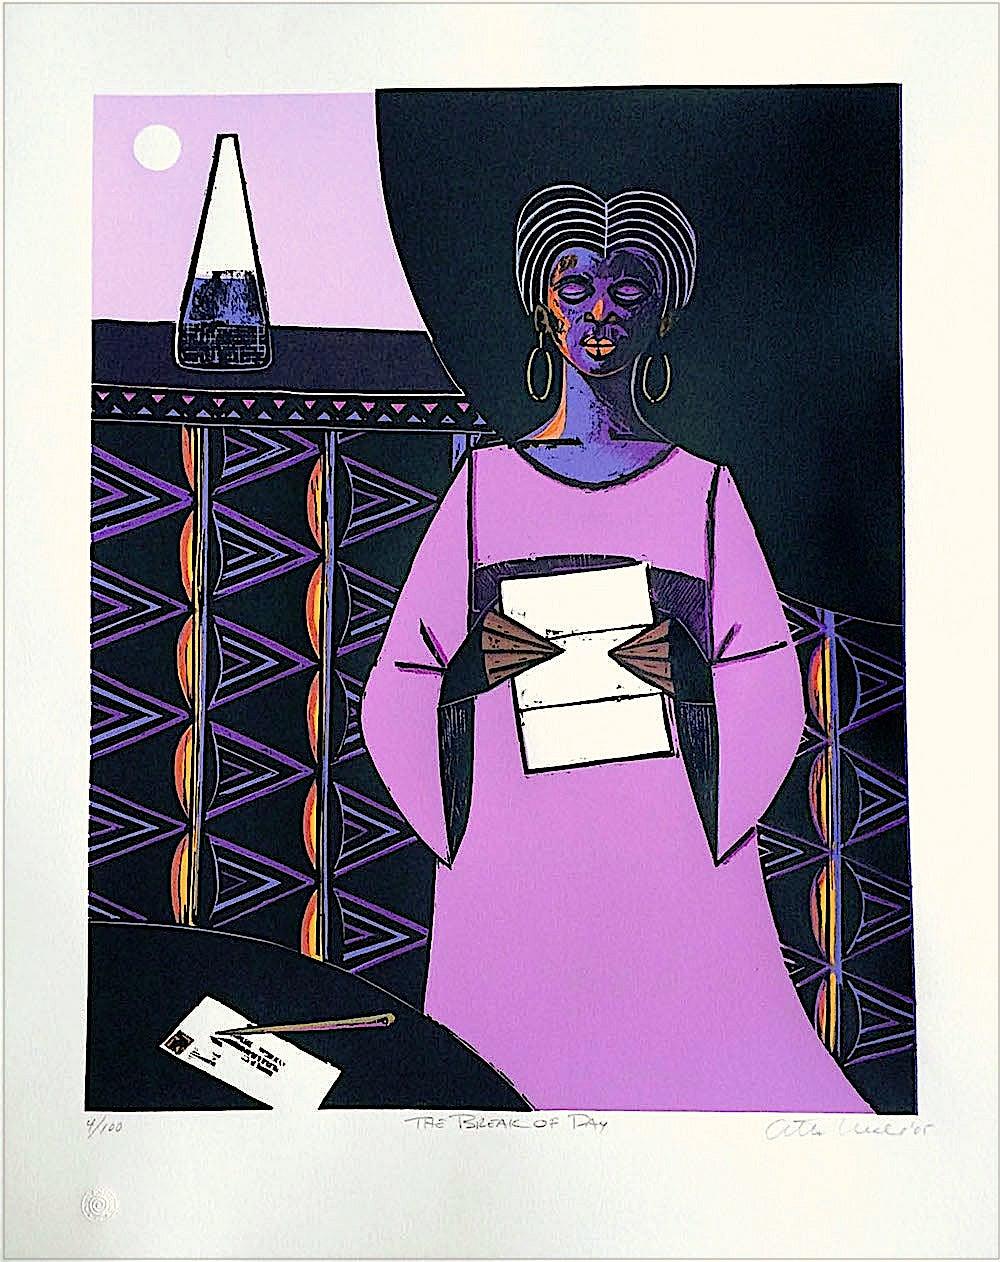 THE BREAK OF DAY is an original limited edition woodcut print by the African-American painter and sculptor, Otto Neals. The woodblock used to print THE BREAK OF DAY was hand-carved by Otto Neals and printed at JK Fine Art Editions Co. in shades of